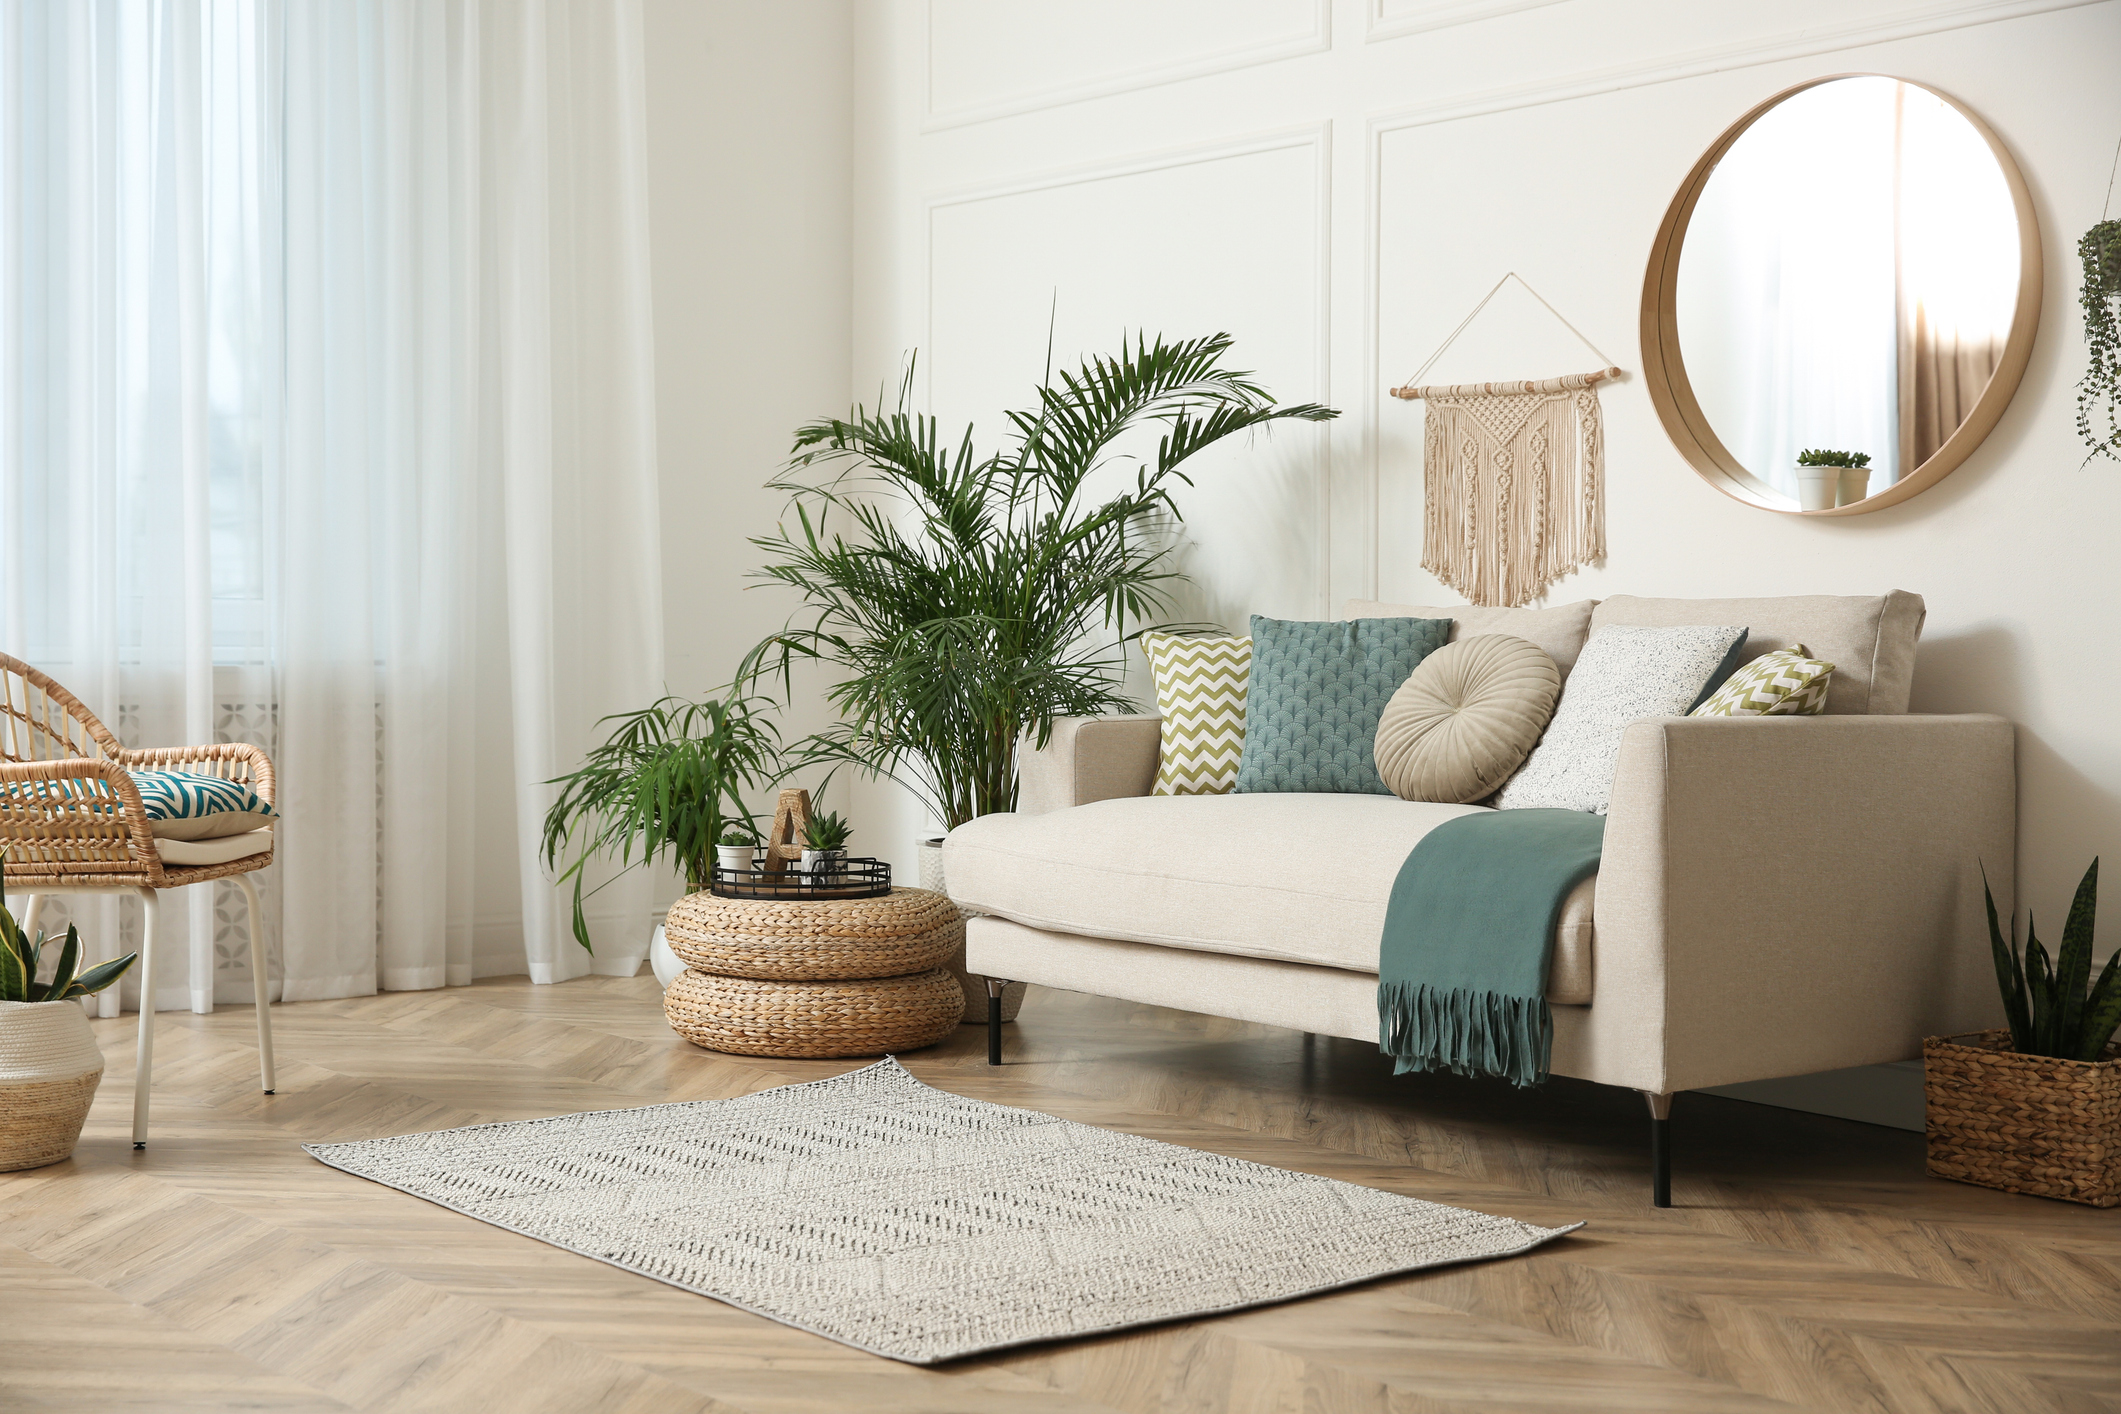 Living Room with Plants